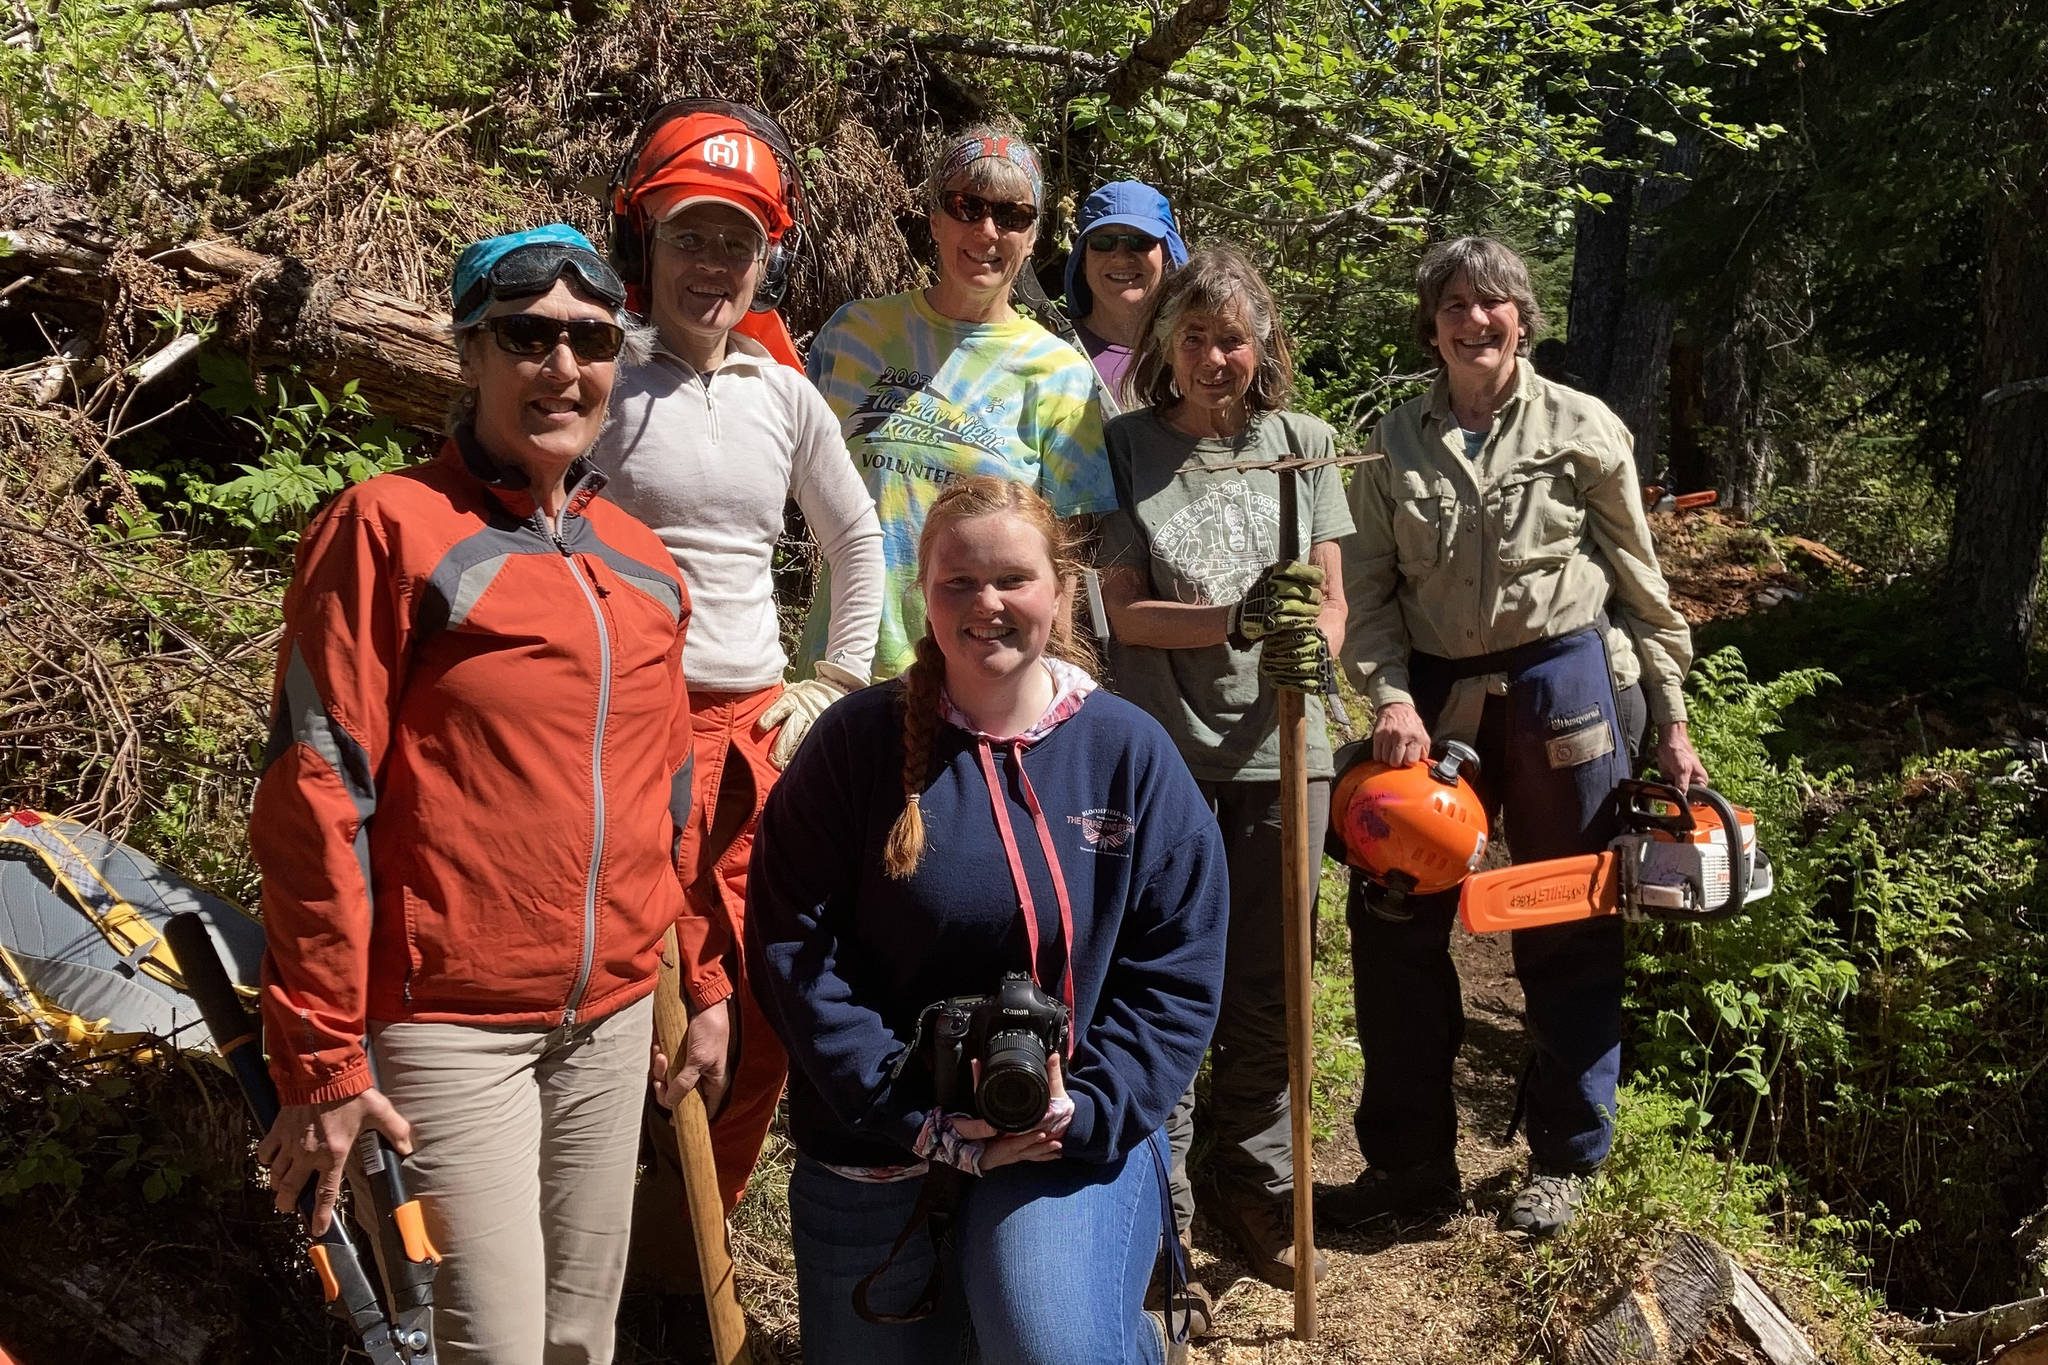 Homer News reporter Sarah Knapp (kneeling) is pictured with the Friends of Kachemak Bay State Park volunteer group who cleared South Eldred Trail during National Trails Day on June 5. The group was able to clear half a mile of the trail. Pictured left to right are Kristine Moerlein, Amy Holman, Kathy Sarns, Lyn Maslow, Ruth Dickerson and Kris Holderied. (Photo by Michael Singer)